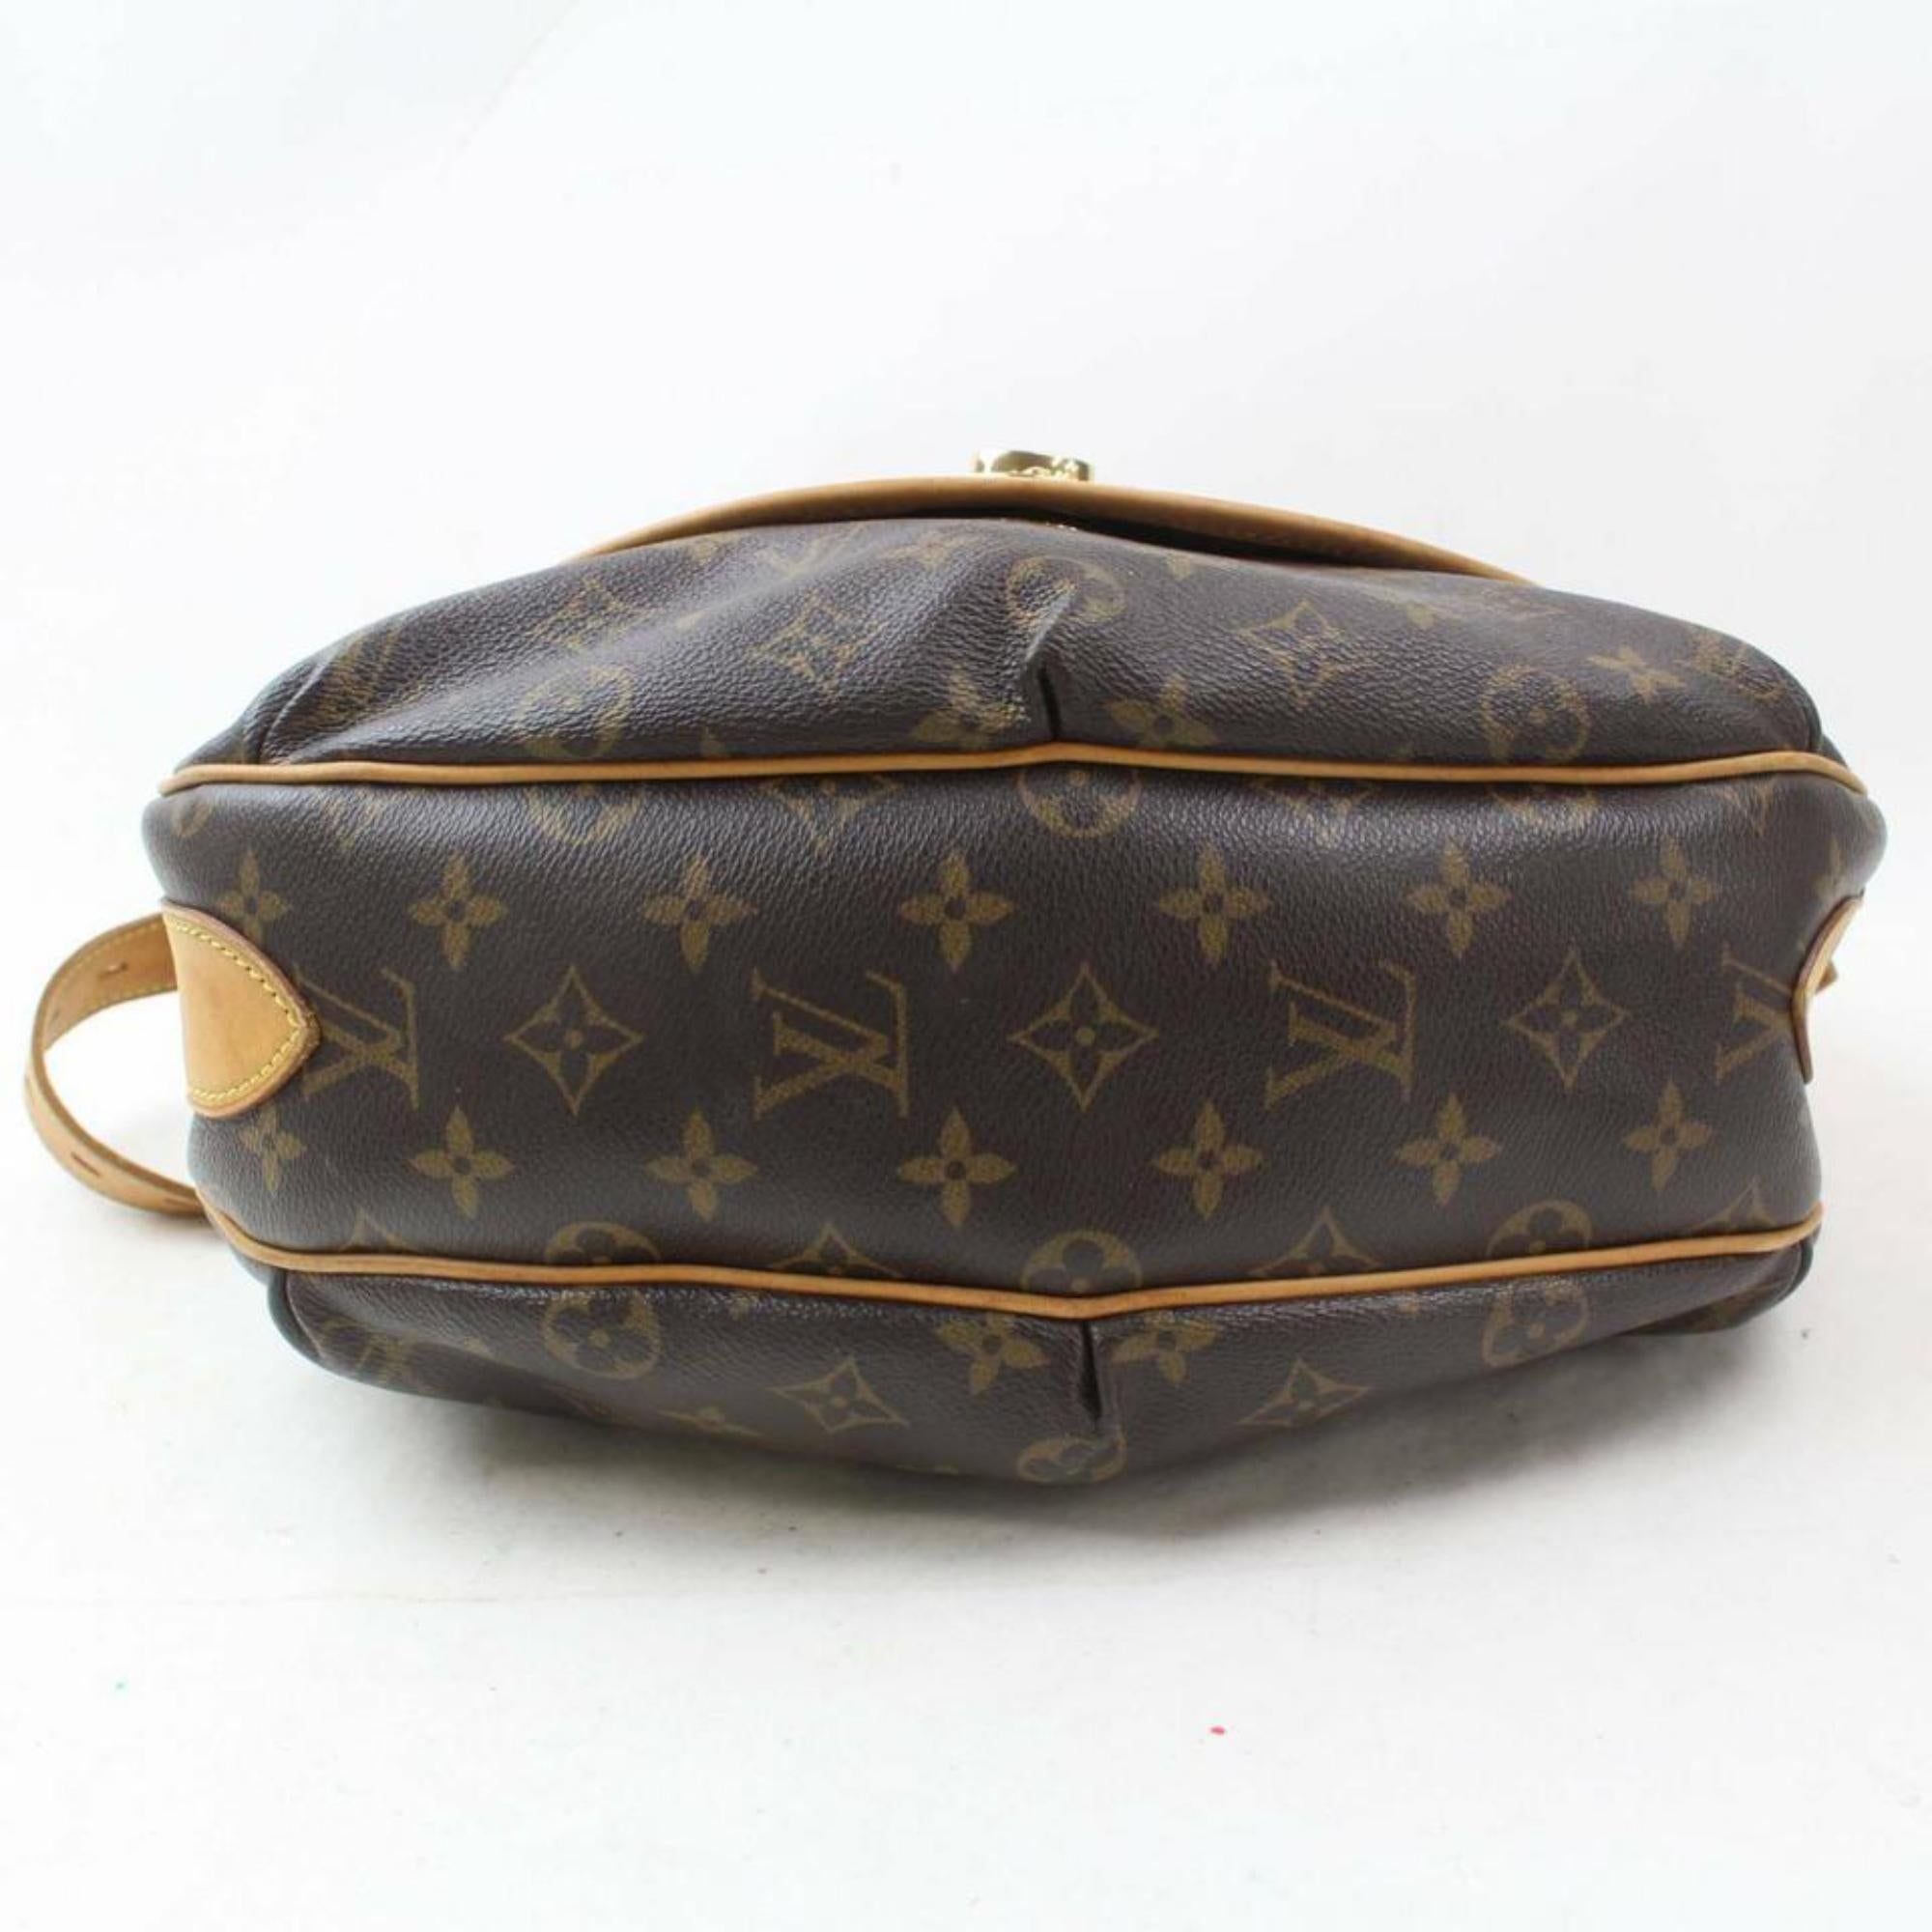 Louis Vuitton Tulum Gm Flap Hobo 870194 Brown Coated Canvas Shoulder Bag In Good Condition For Sale In Forest Hills, NY